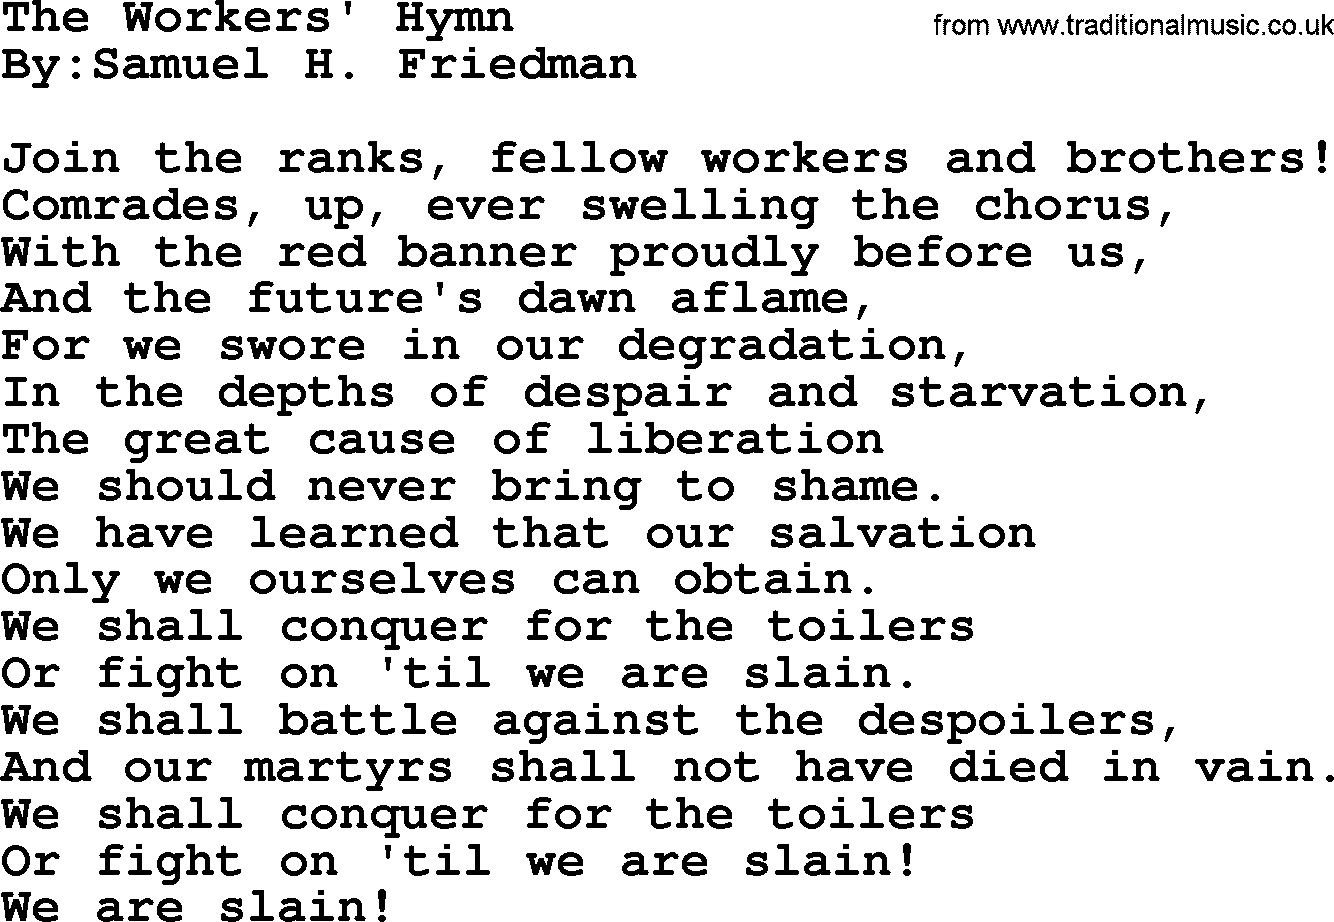 Political, Solidarity, Workers or Union song: The Workers Hymn, lyrics